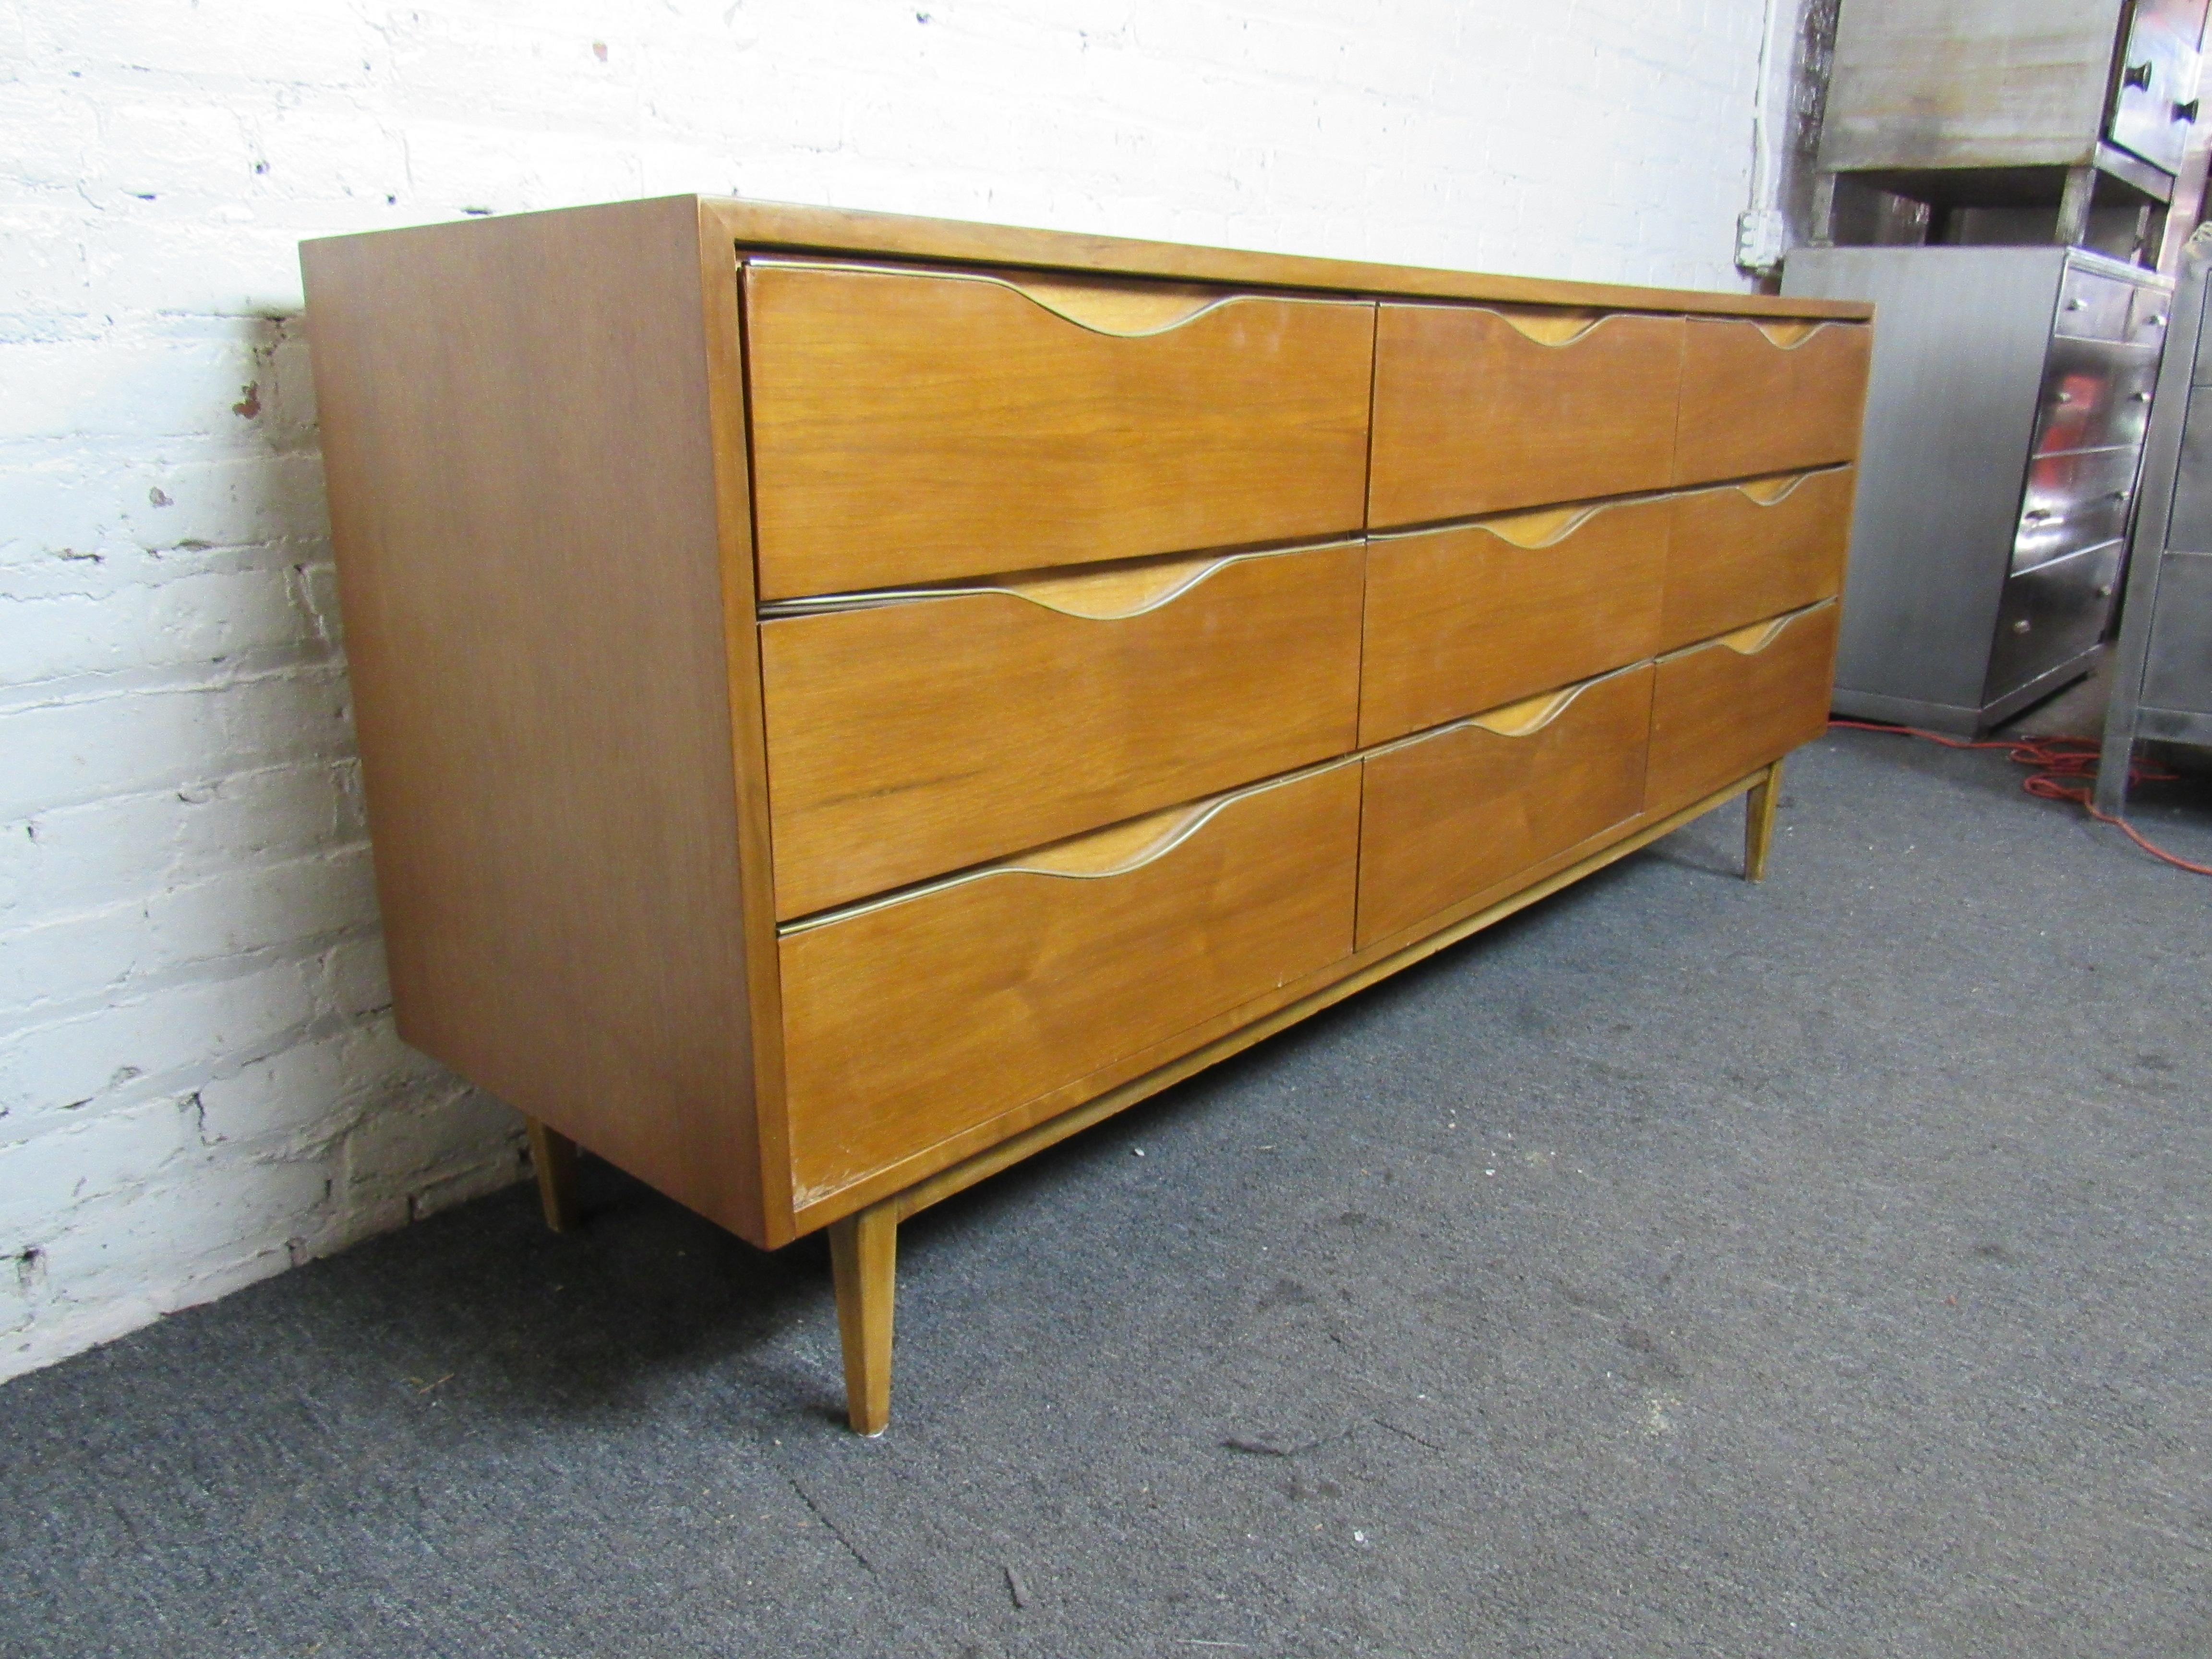 Stunning walnut woodgrain is paired with solid mid-century craftsmanship in this large vintage dresser. Nine drawers provide plenty of space for storage in a beautiful and timeless design. Please confirm item location with seller (NY/NJ).